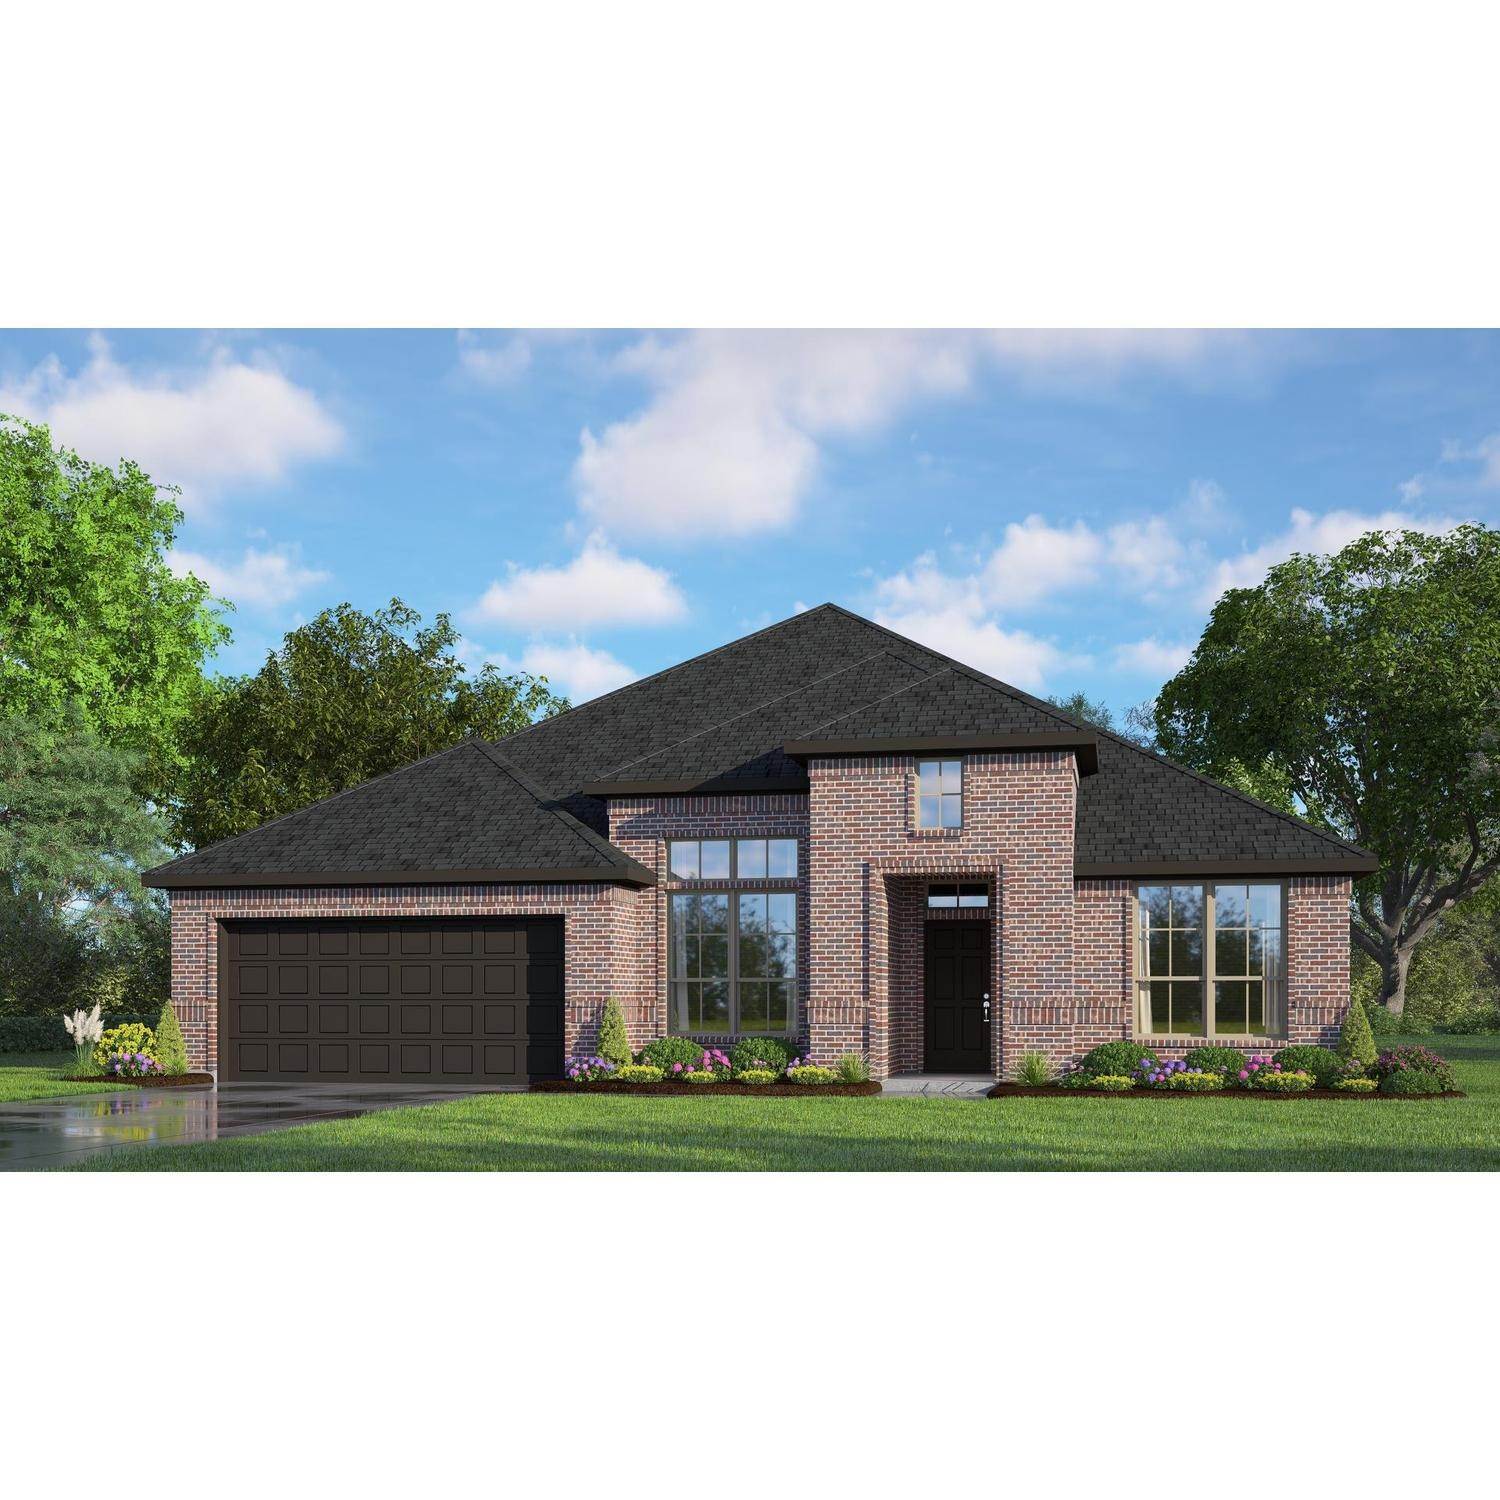 Single Family for Sale at Joshua, TX 76058